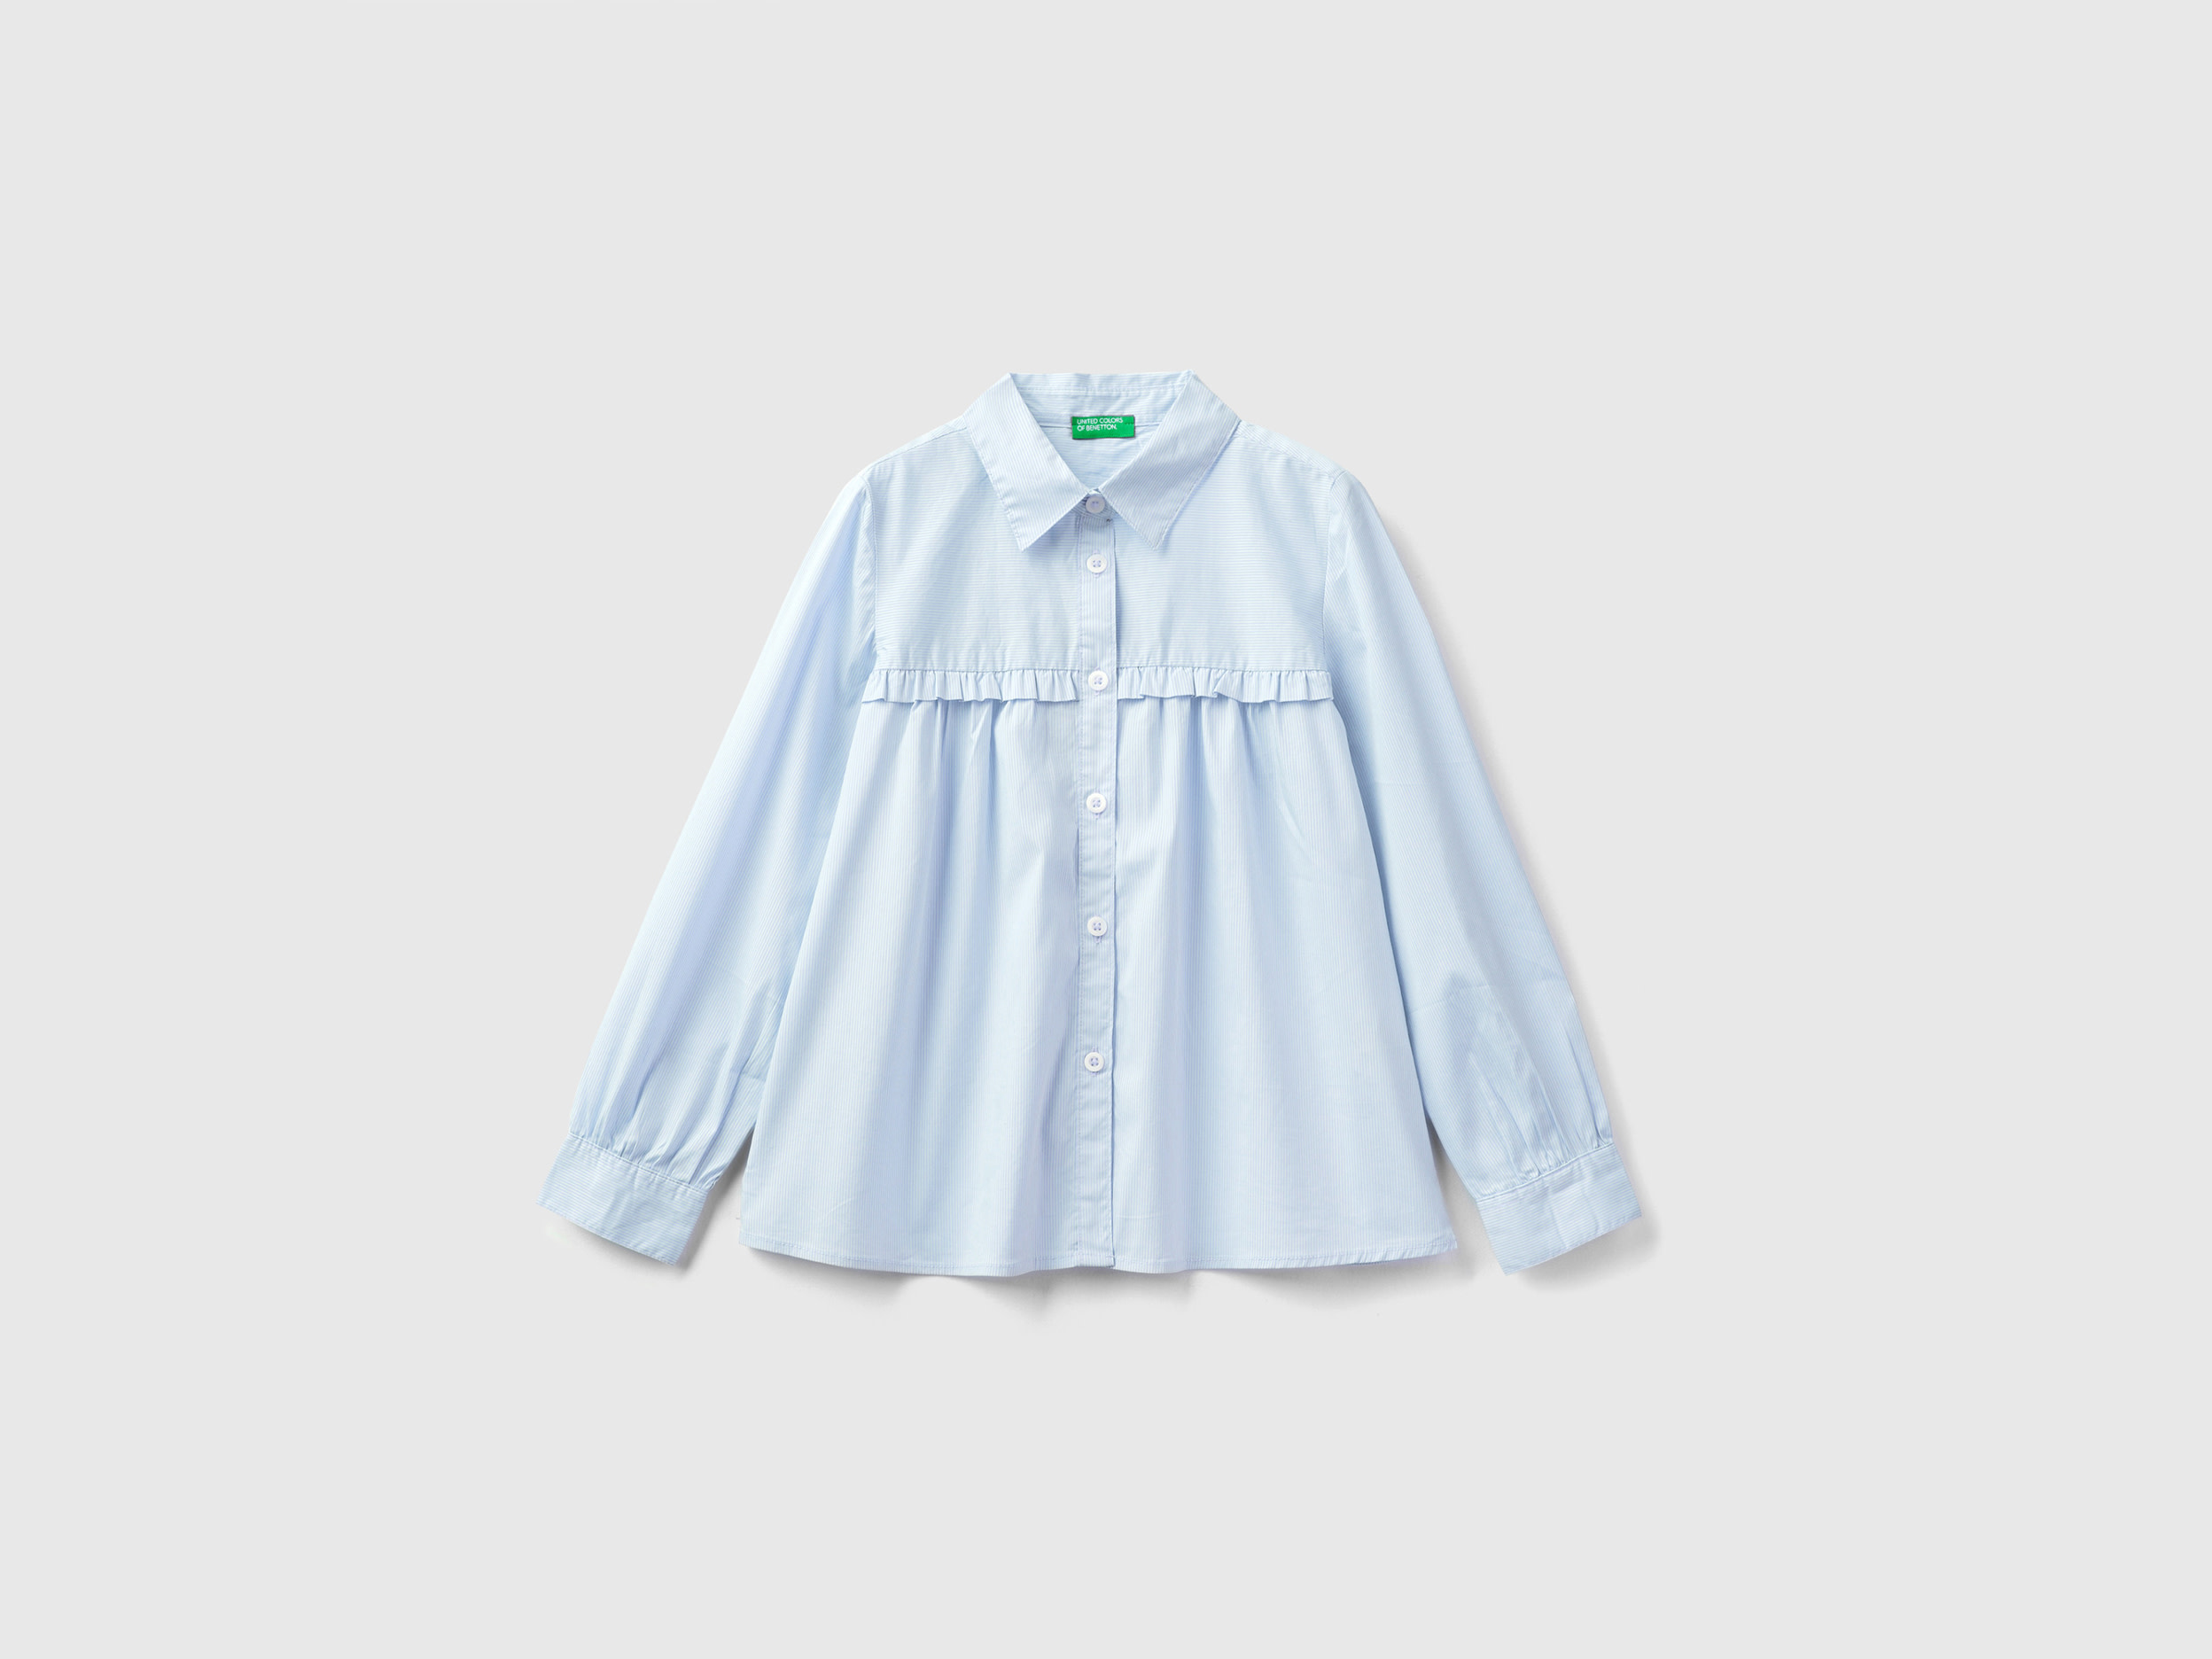 Benetton, Shirt With Rouches On The Yoke, size 3XL, Sky Blue, Kids